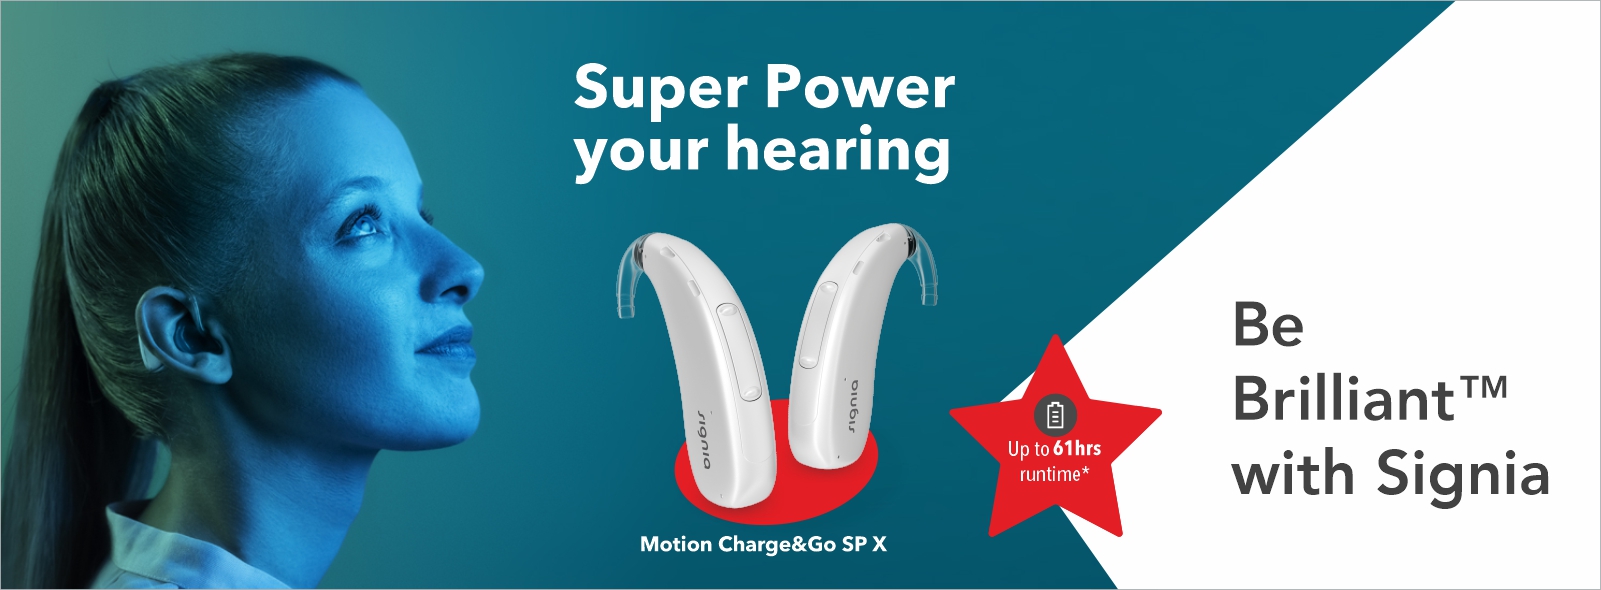 motion charge-go sp-x Home Banner